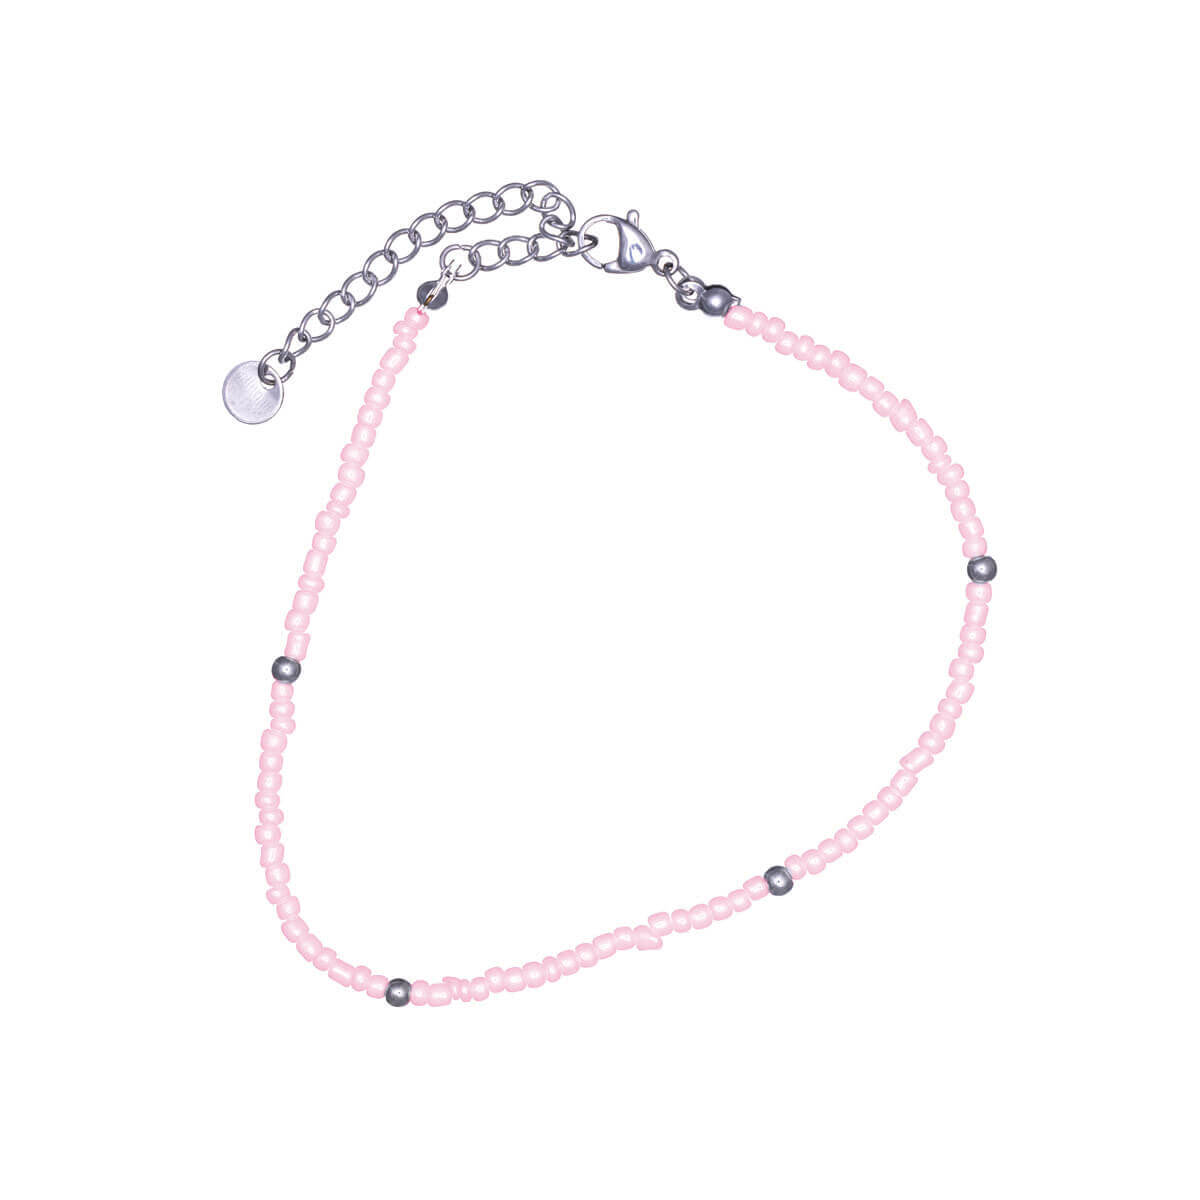 Steel ankle chain with small coloured beads (Steel 316L)